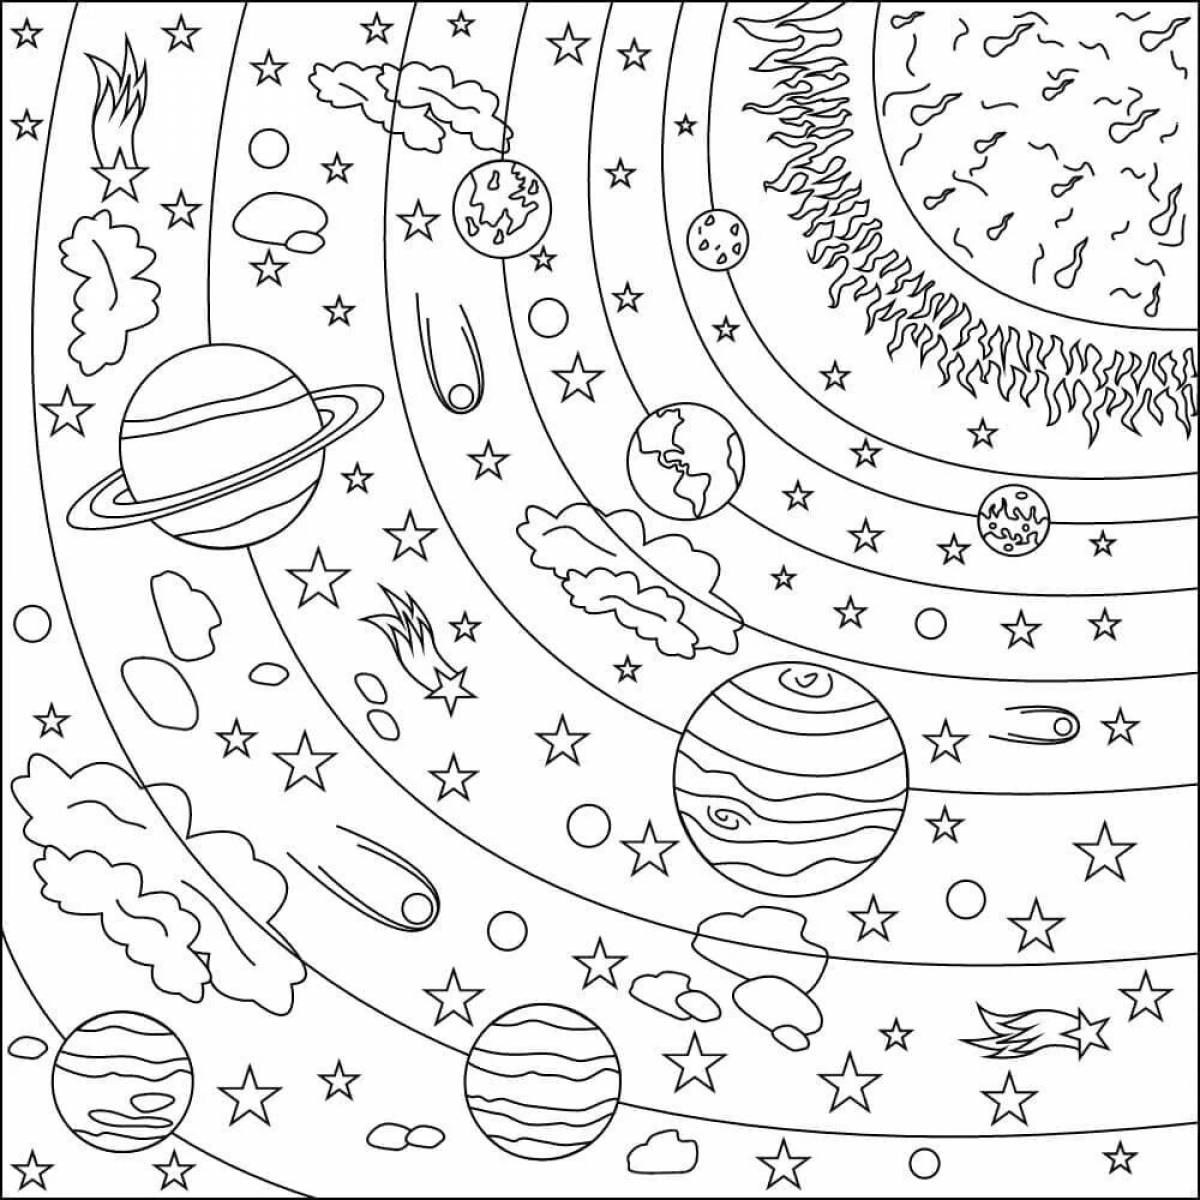 Exciting coloring of all the planets